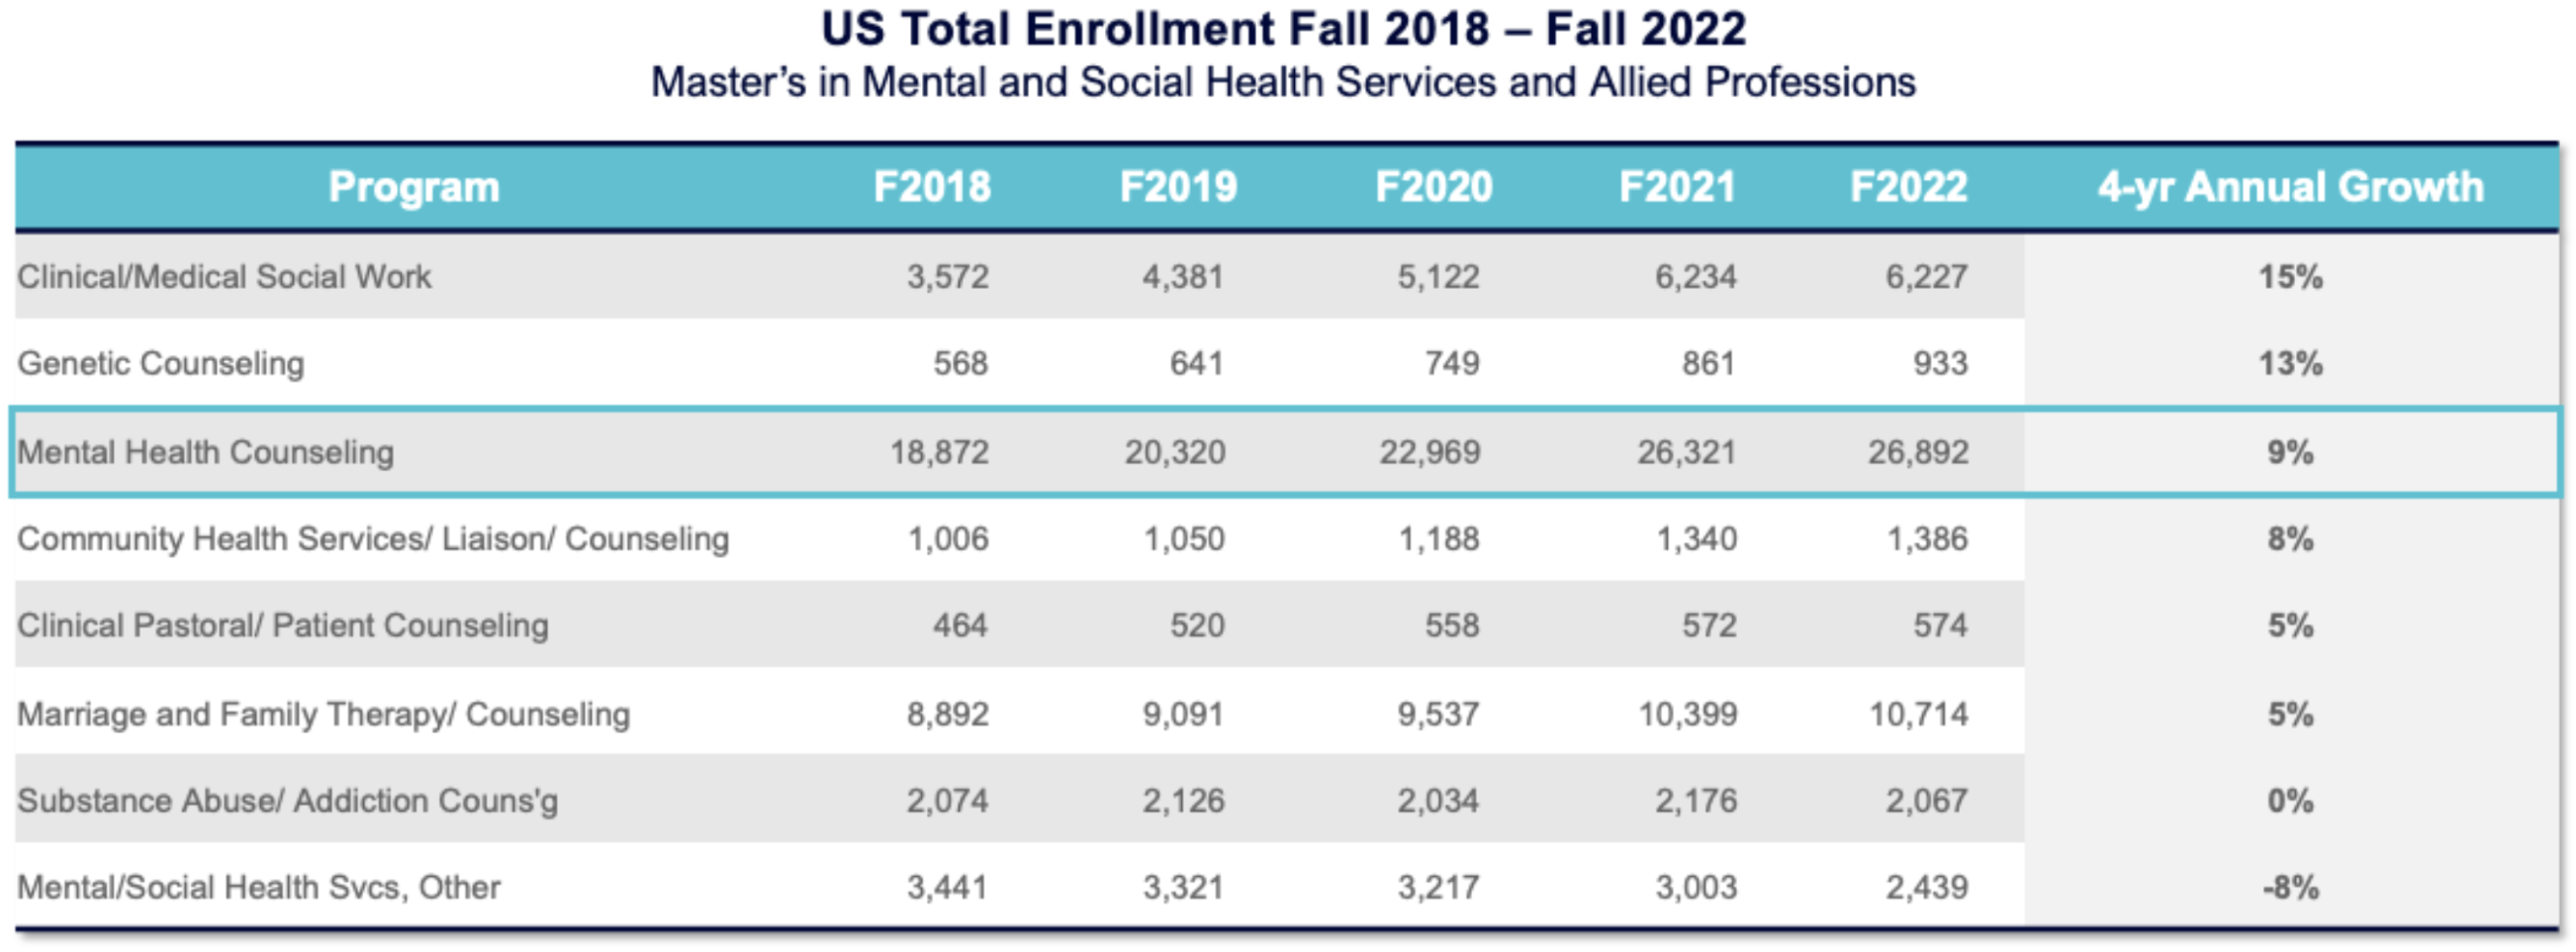 US Total Enrollment Fall 2018-Fall 2022: Master's in Mental and Social Health services and Allied Professions